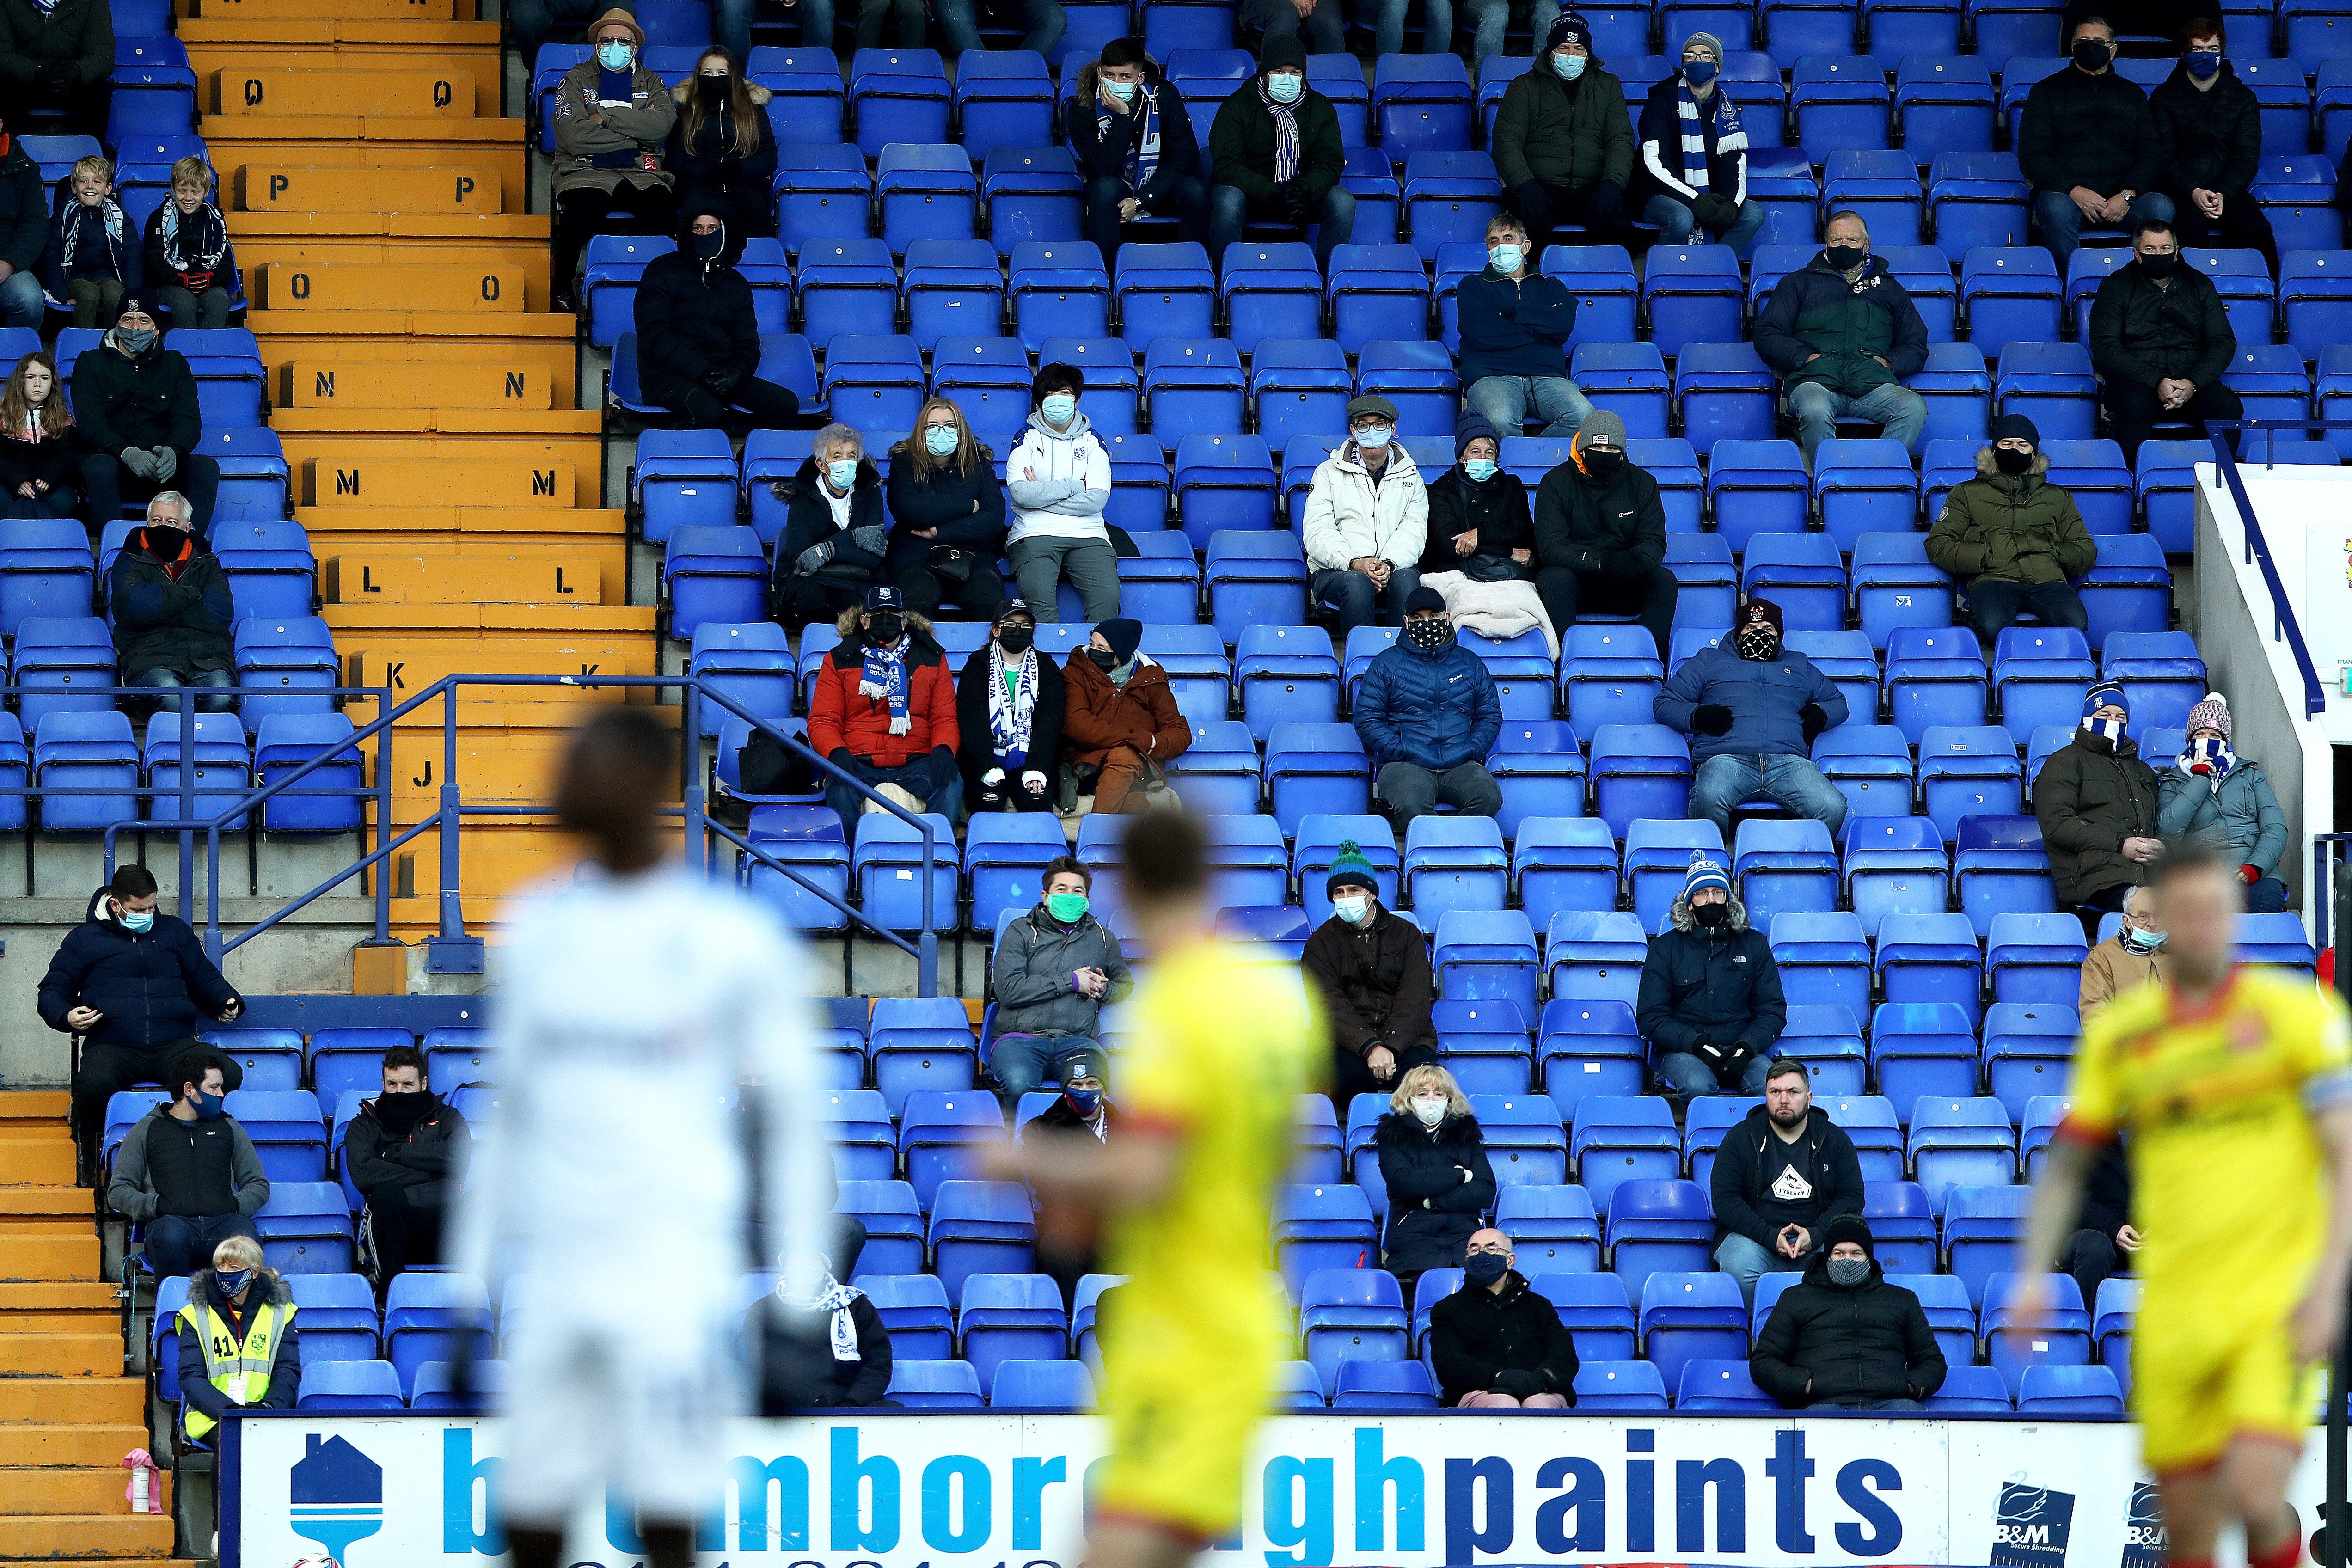 Tranmere fans watch the action from the stands during the Sky Bet League Two match at Prenton Park, Birkenhead